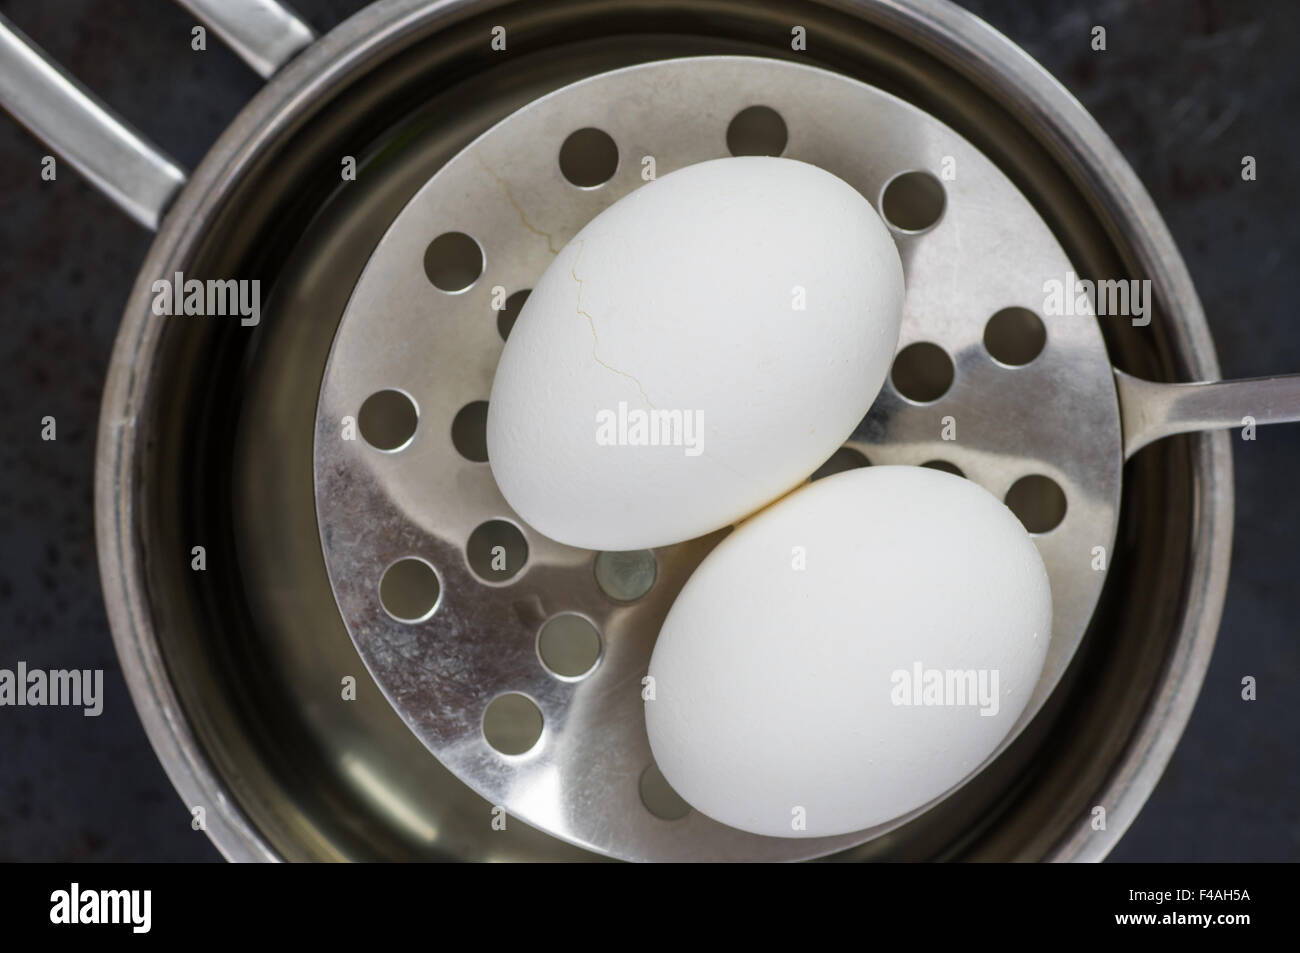 Eggs skimmer get from the boiling water top view Stock Photo